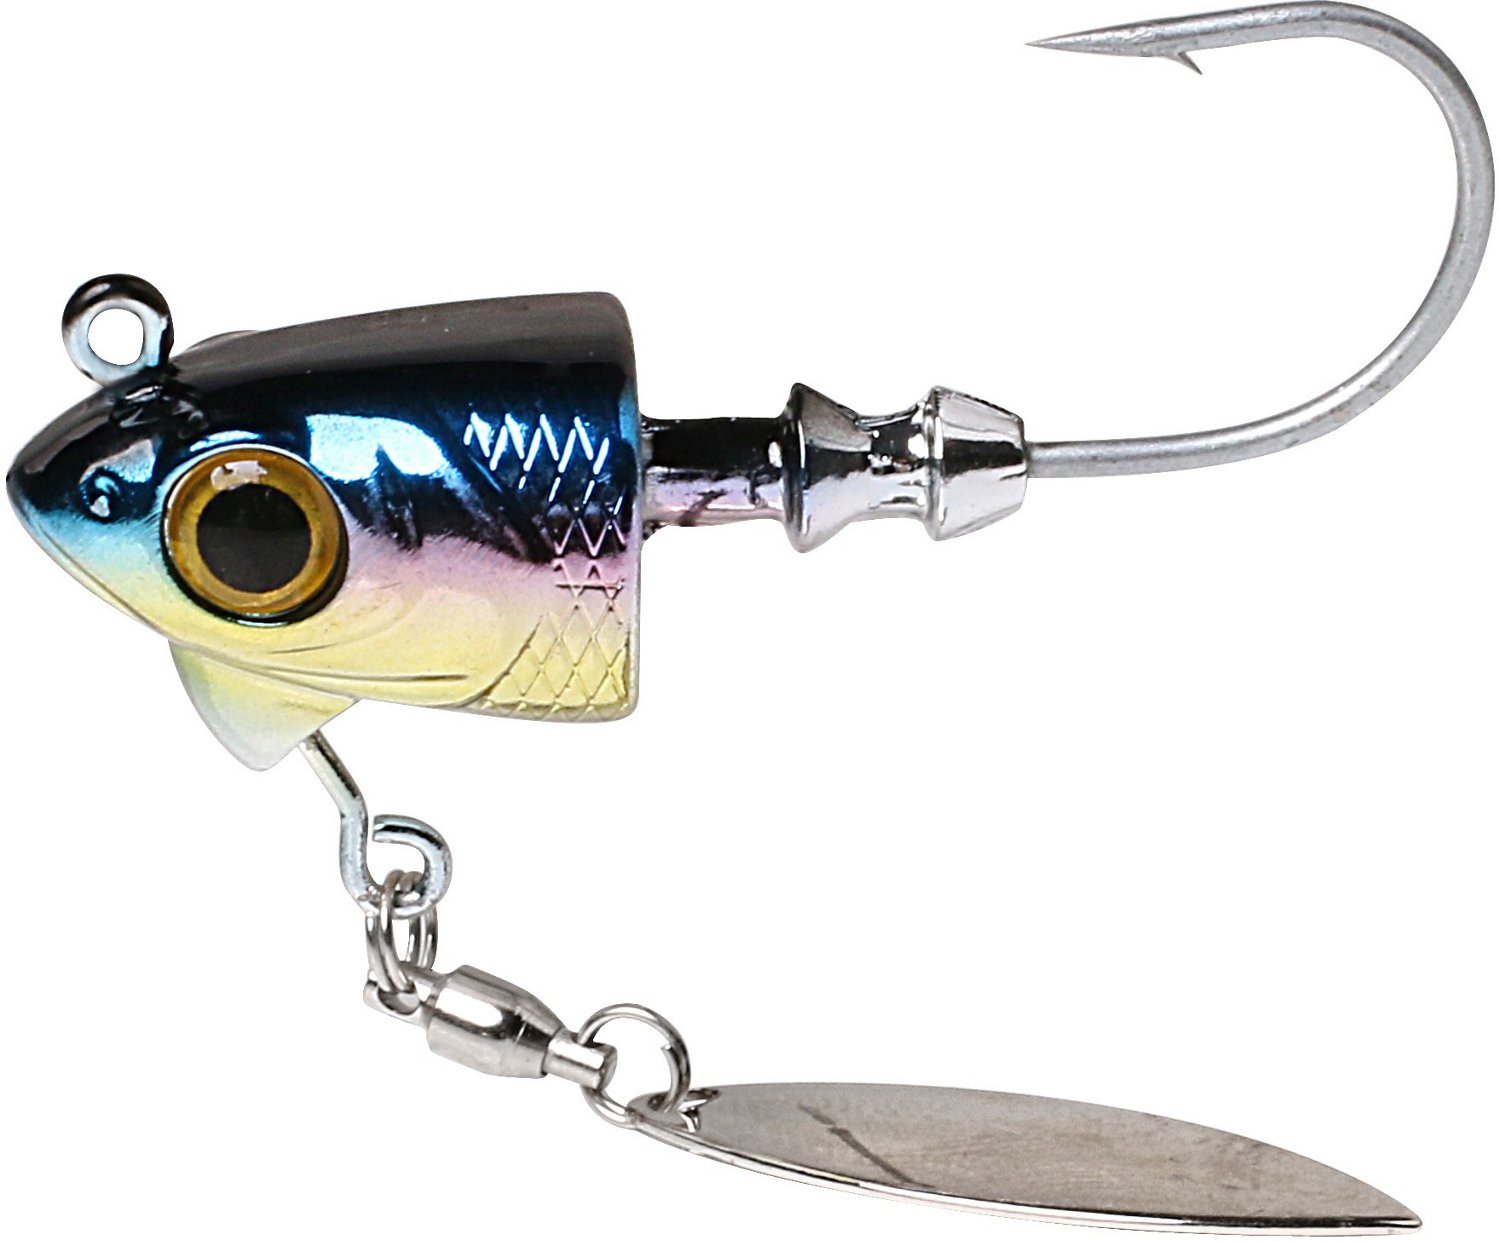 H2O Xpress Multi-Jointed Shad Swimbait - 3-1/2-in, 3/8 oz.